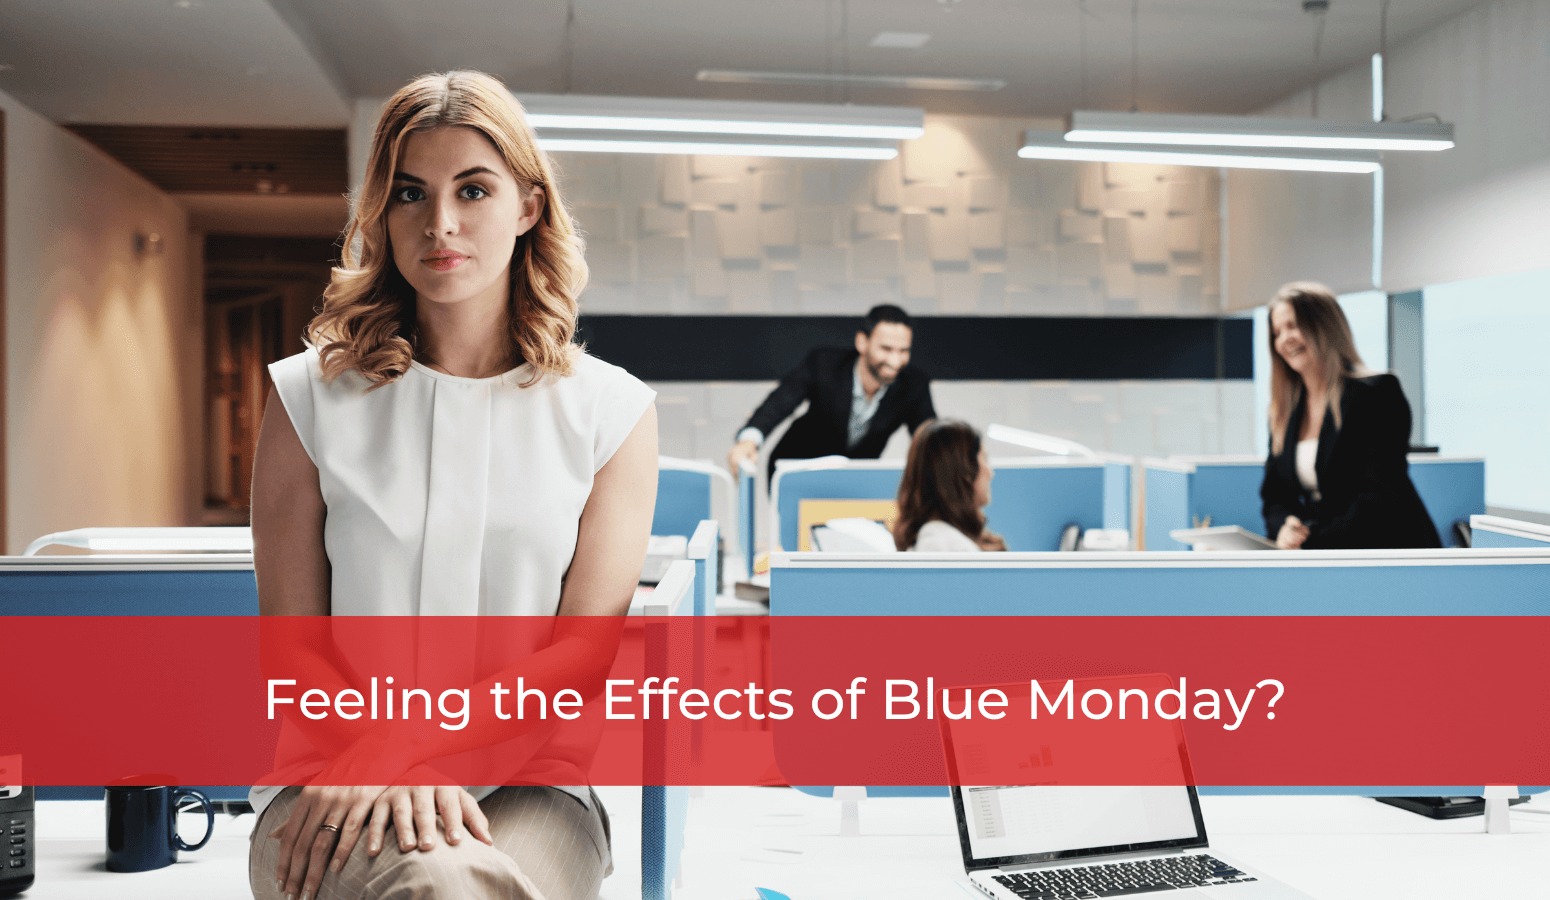 Featured image for “Feeling the Effects of Blue Monday?”